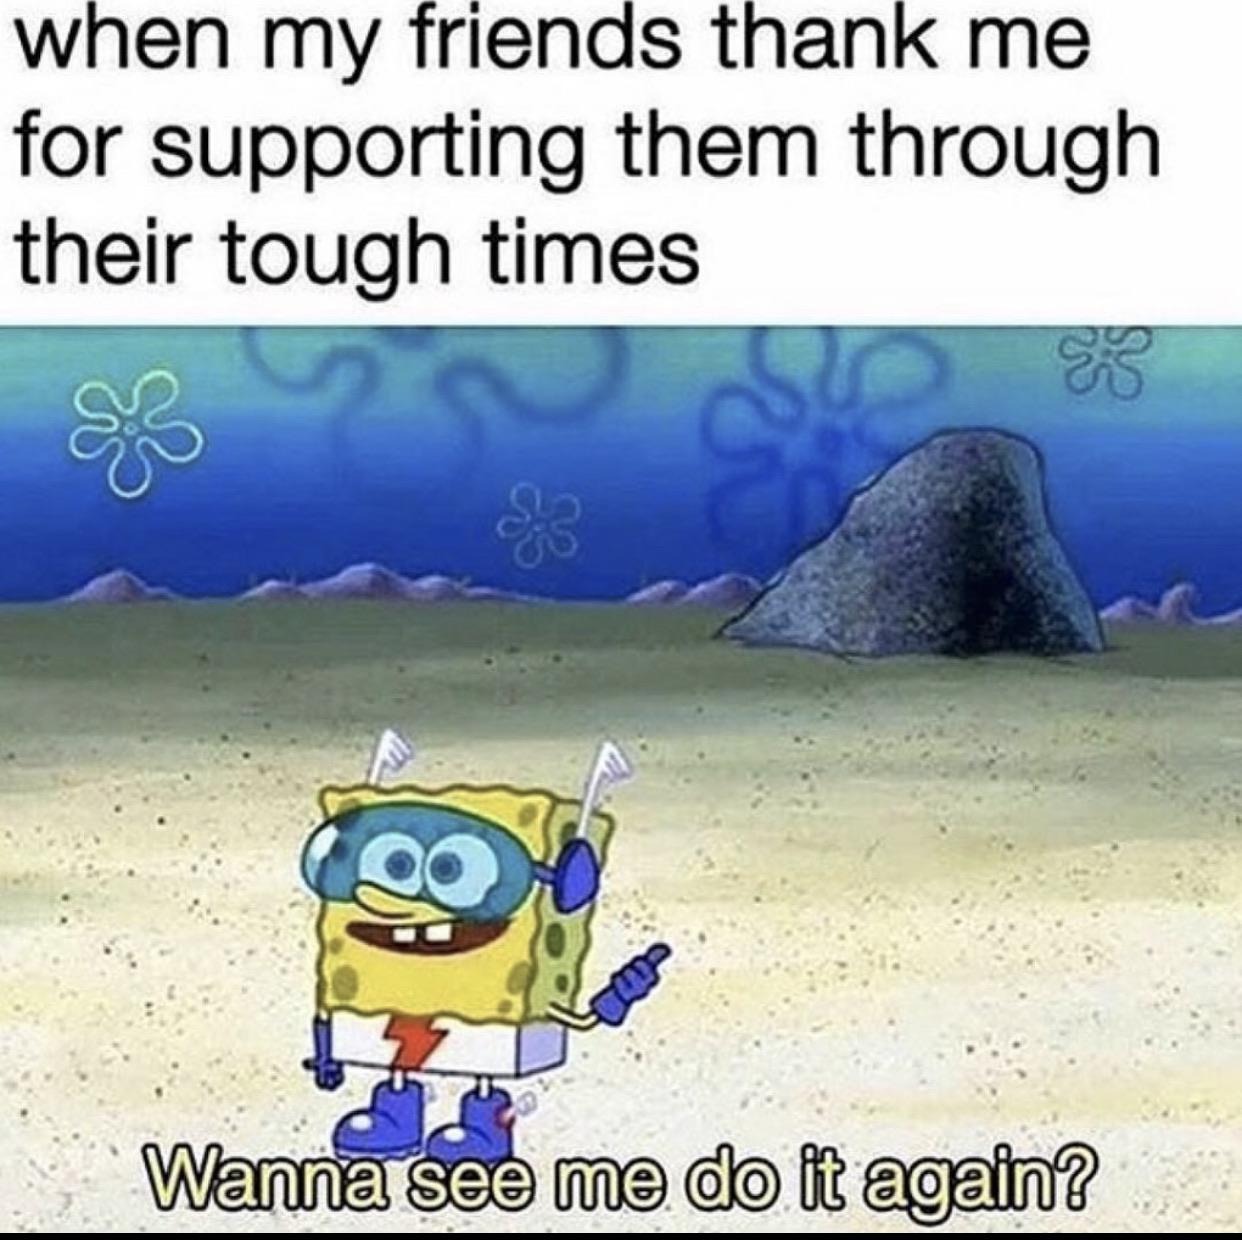 Wholesome memes,  Wholesome Memes Wholesome memes,  text: when my friends thank me for supporting them through their tough times Wanna see me do it again? 